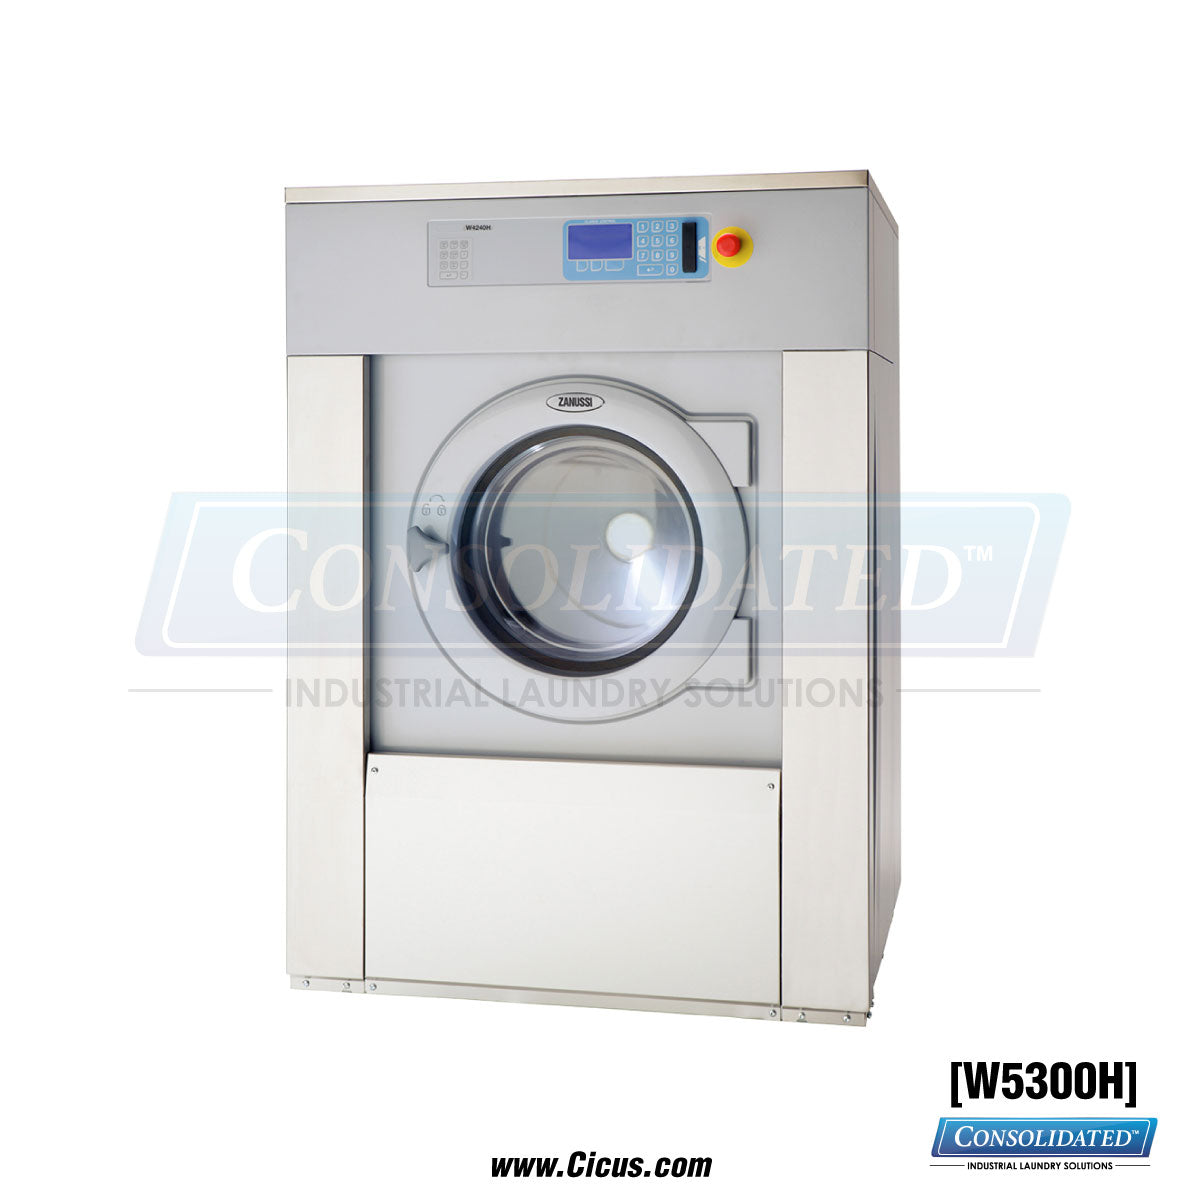 Electrolux G-Force Soft-Mount 75 LB Washer [W5300H]